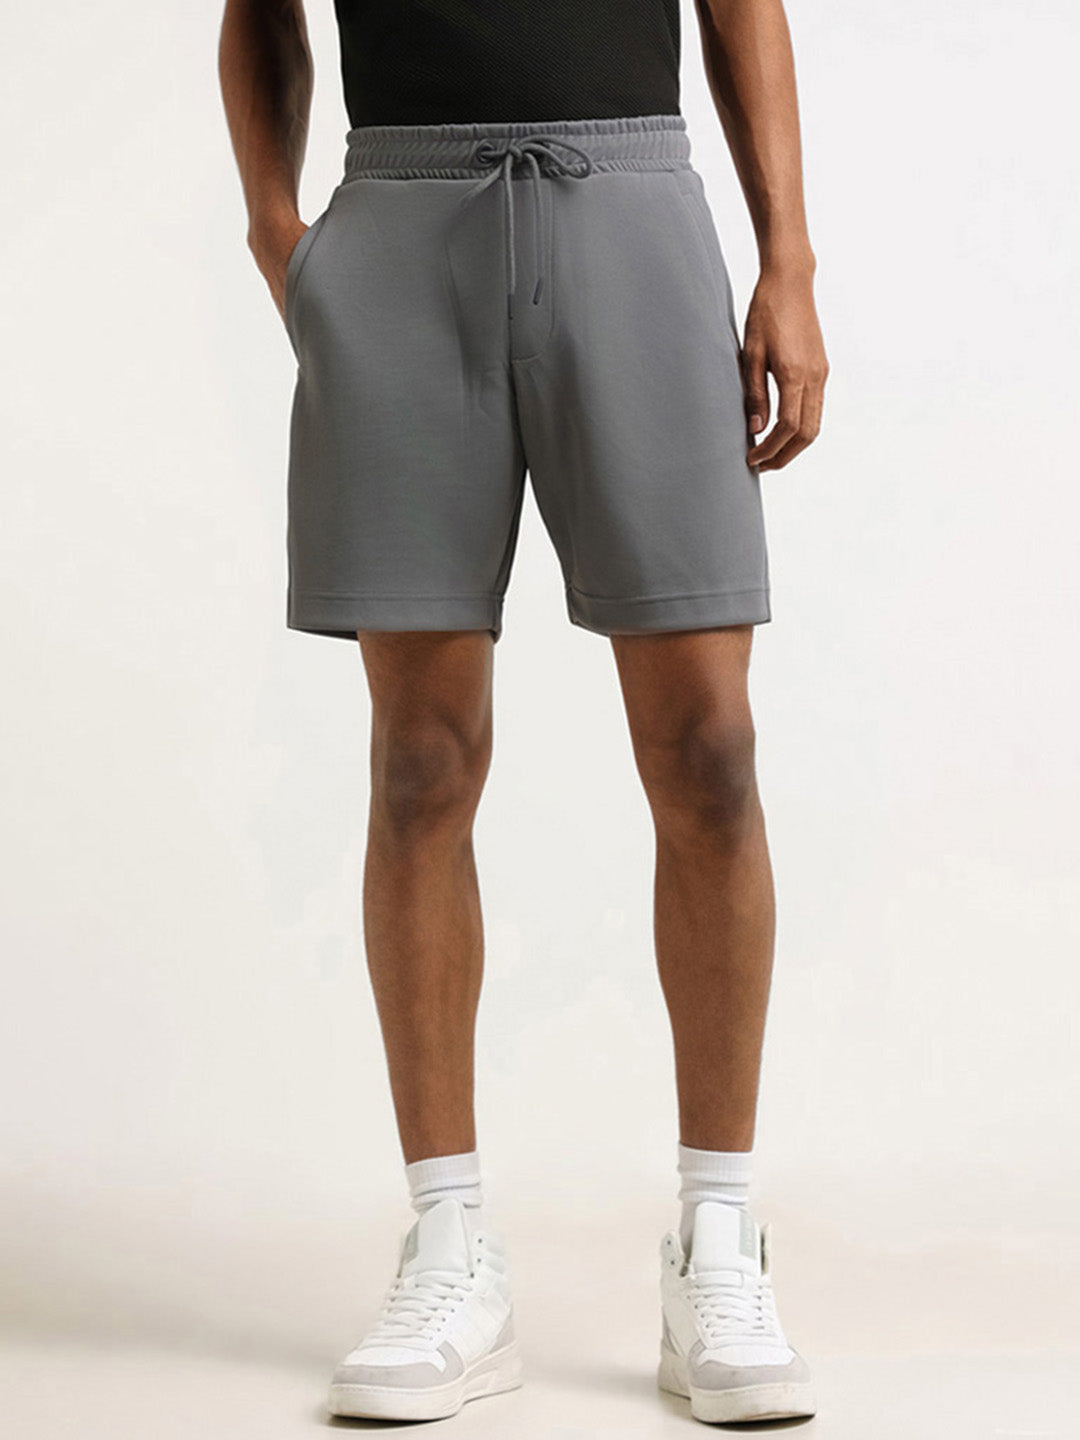 Studiofit Grey Self Patterned Relaxed Fit Shorts